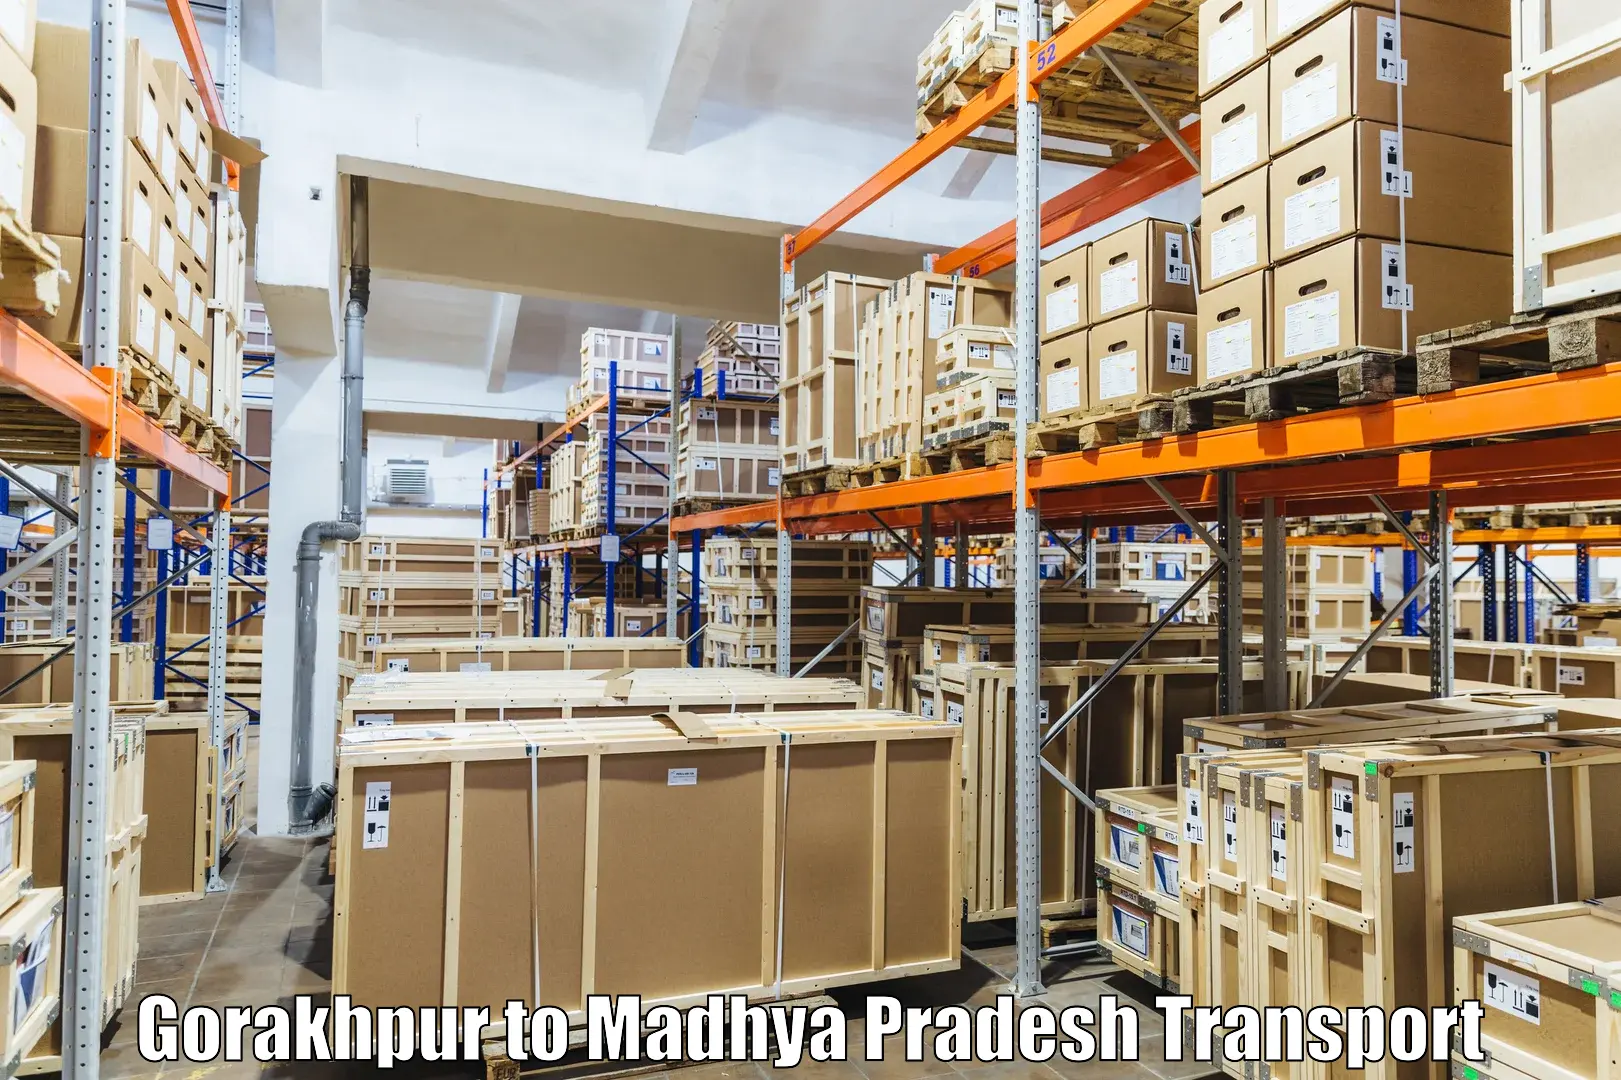 Part load transport service in India Gorakhpur to Ranchha